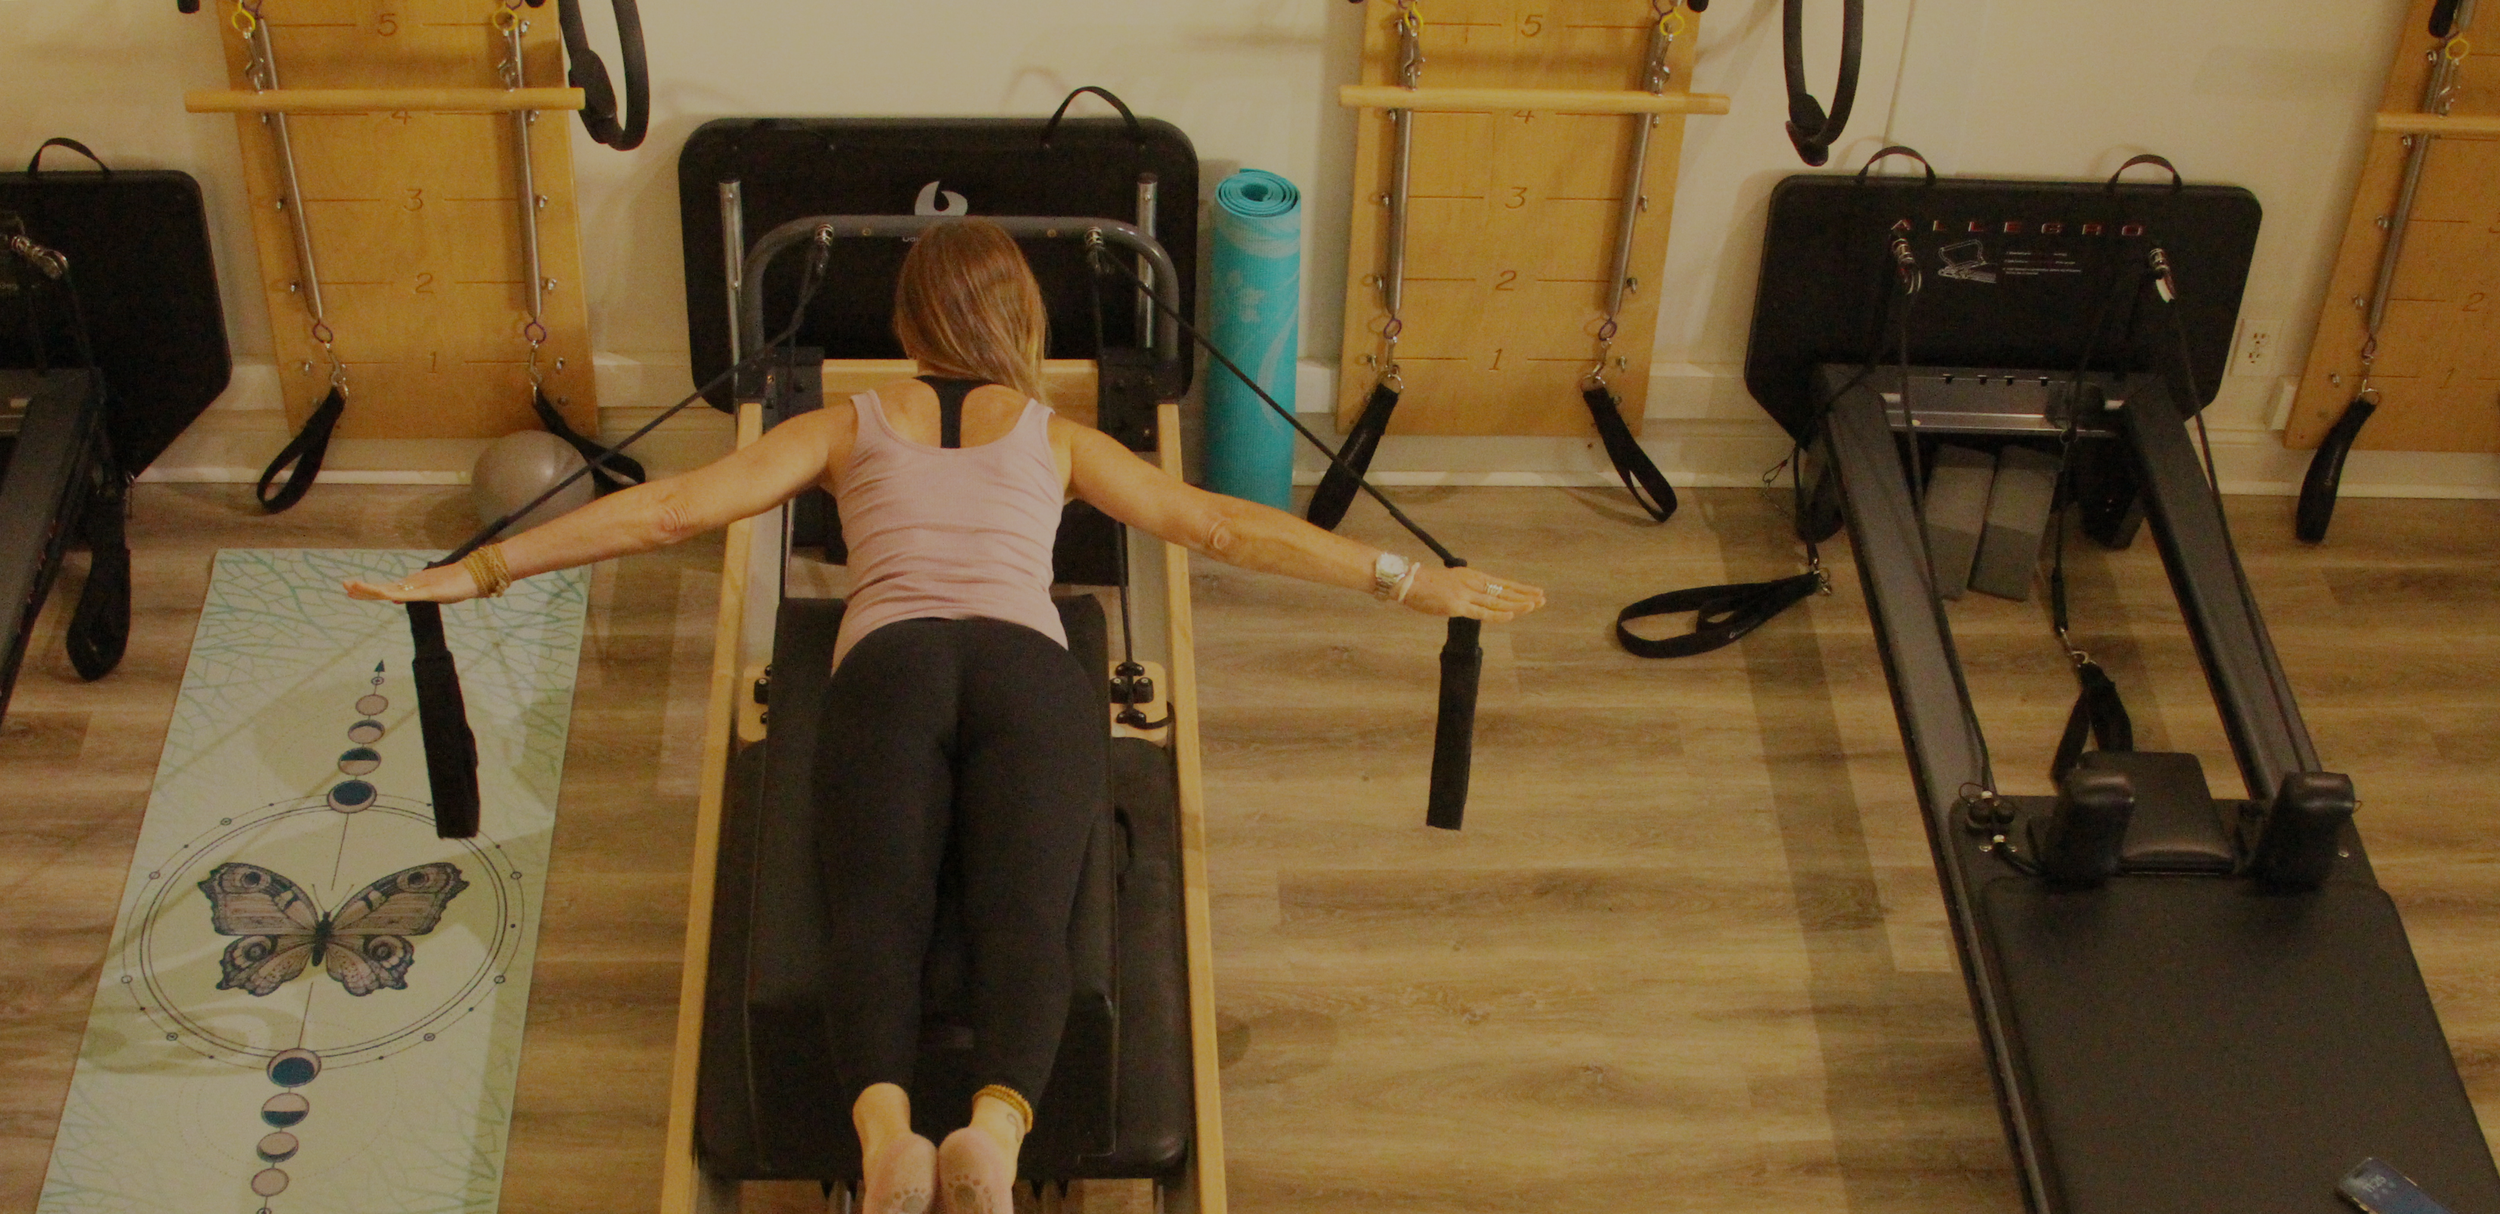 Why is Reformer Pilates good for you? - Kore Gallery